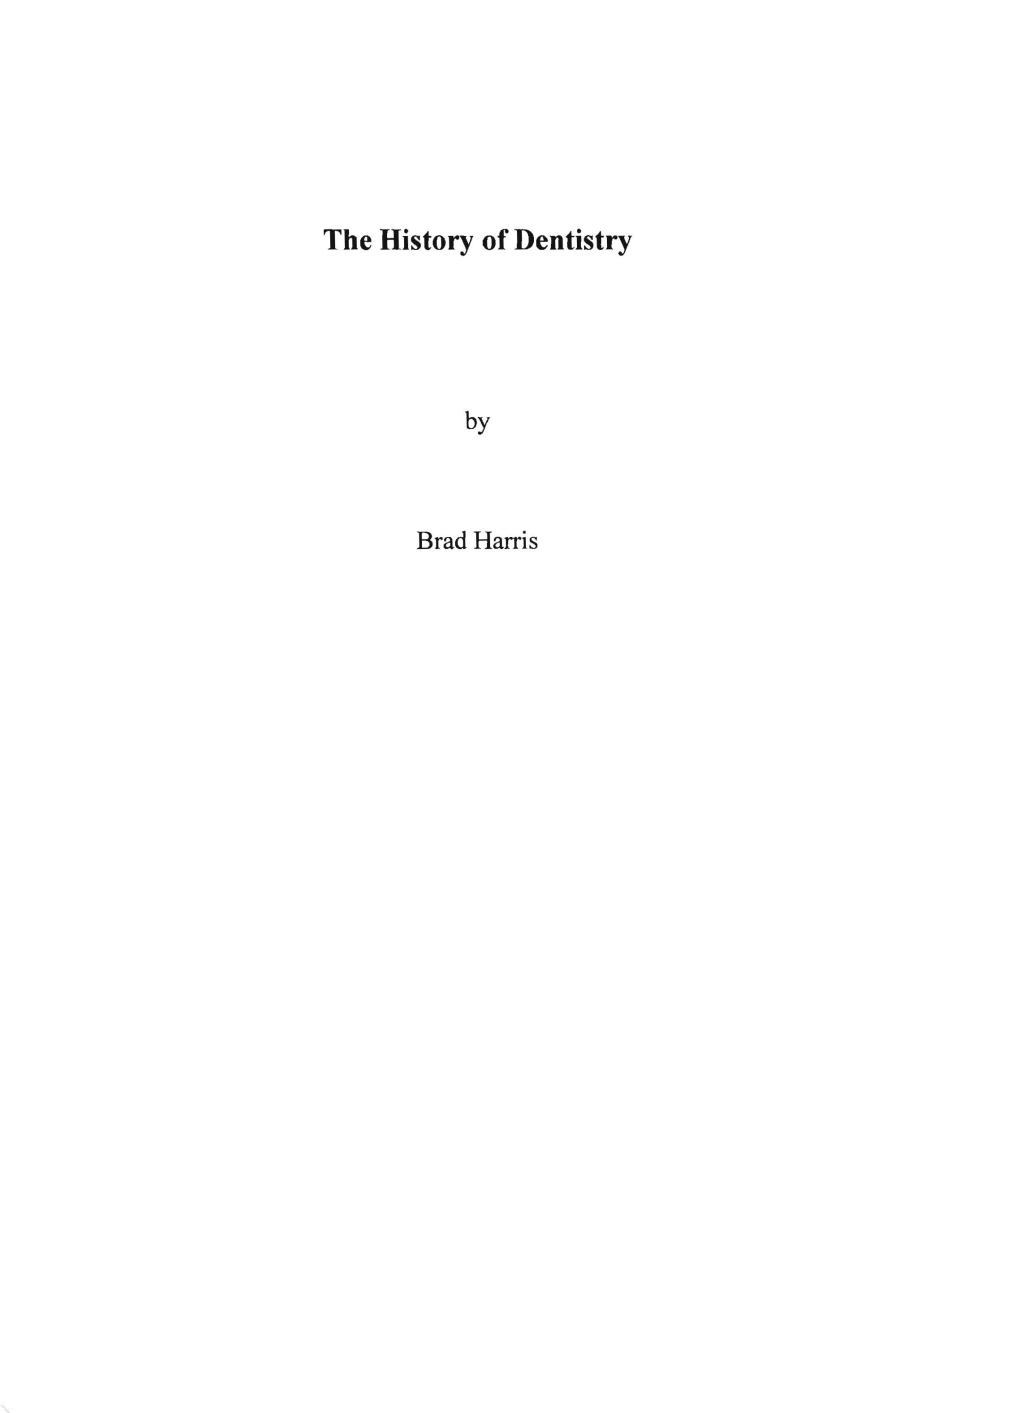 The History of Dentistry By